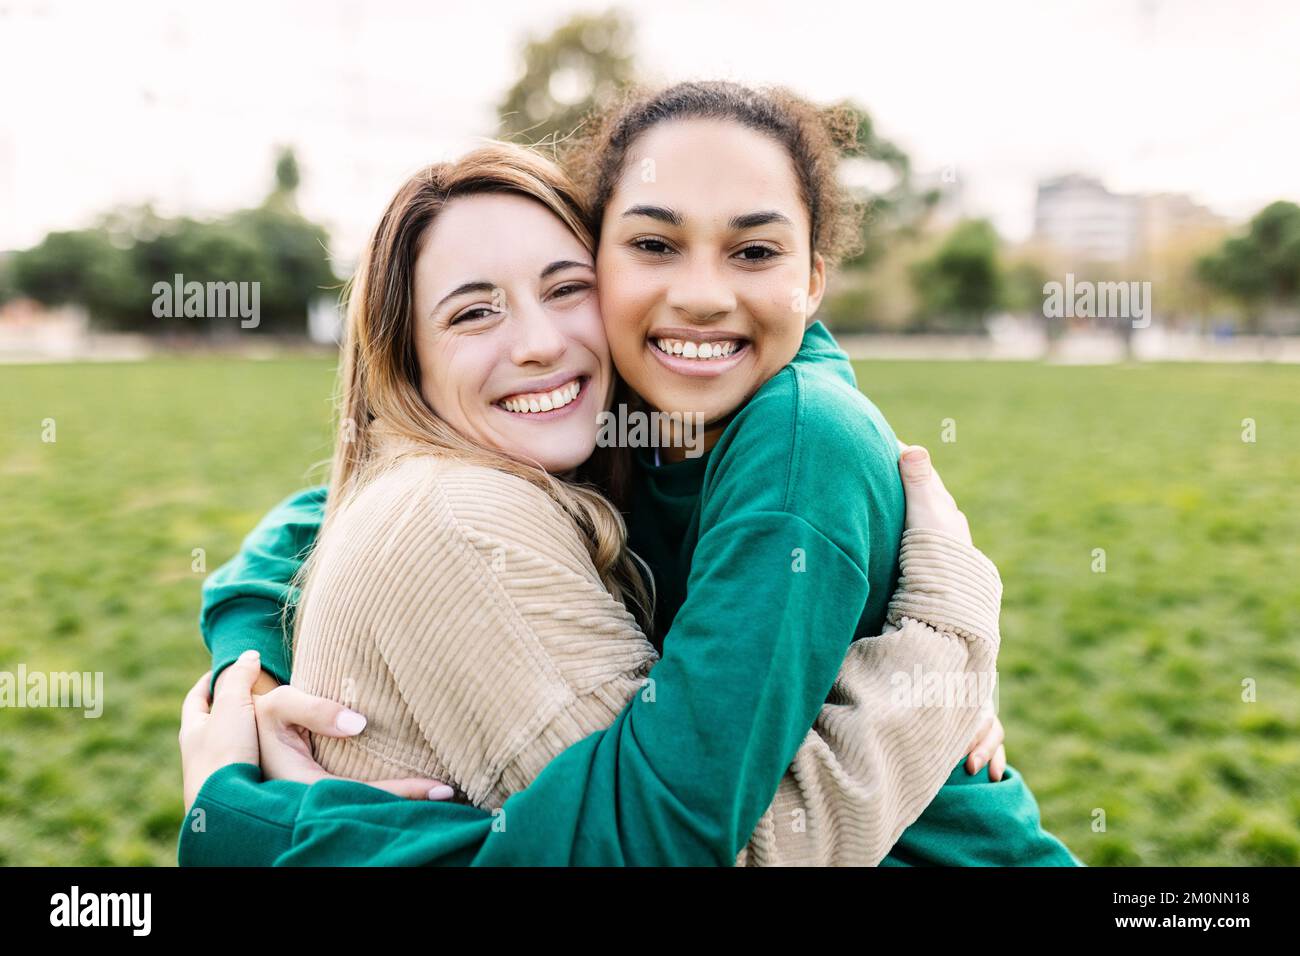 Portrait of happy young multi-ethnic female friends hugging each other outdoors Stock Photo